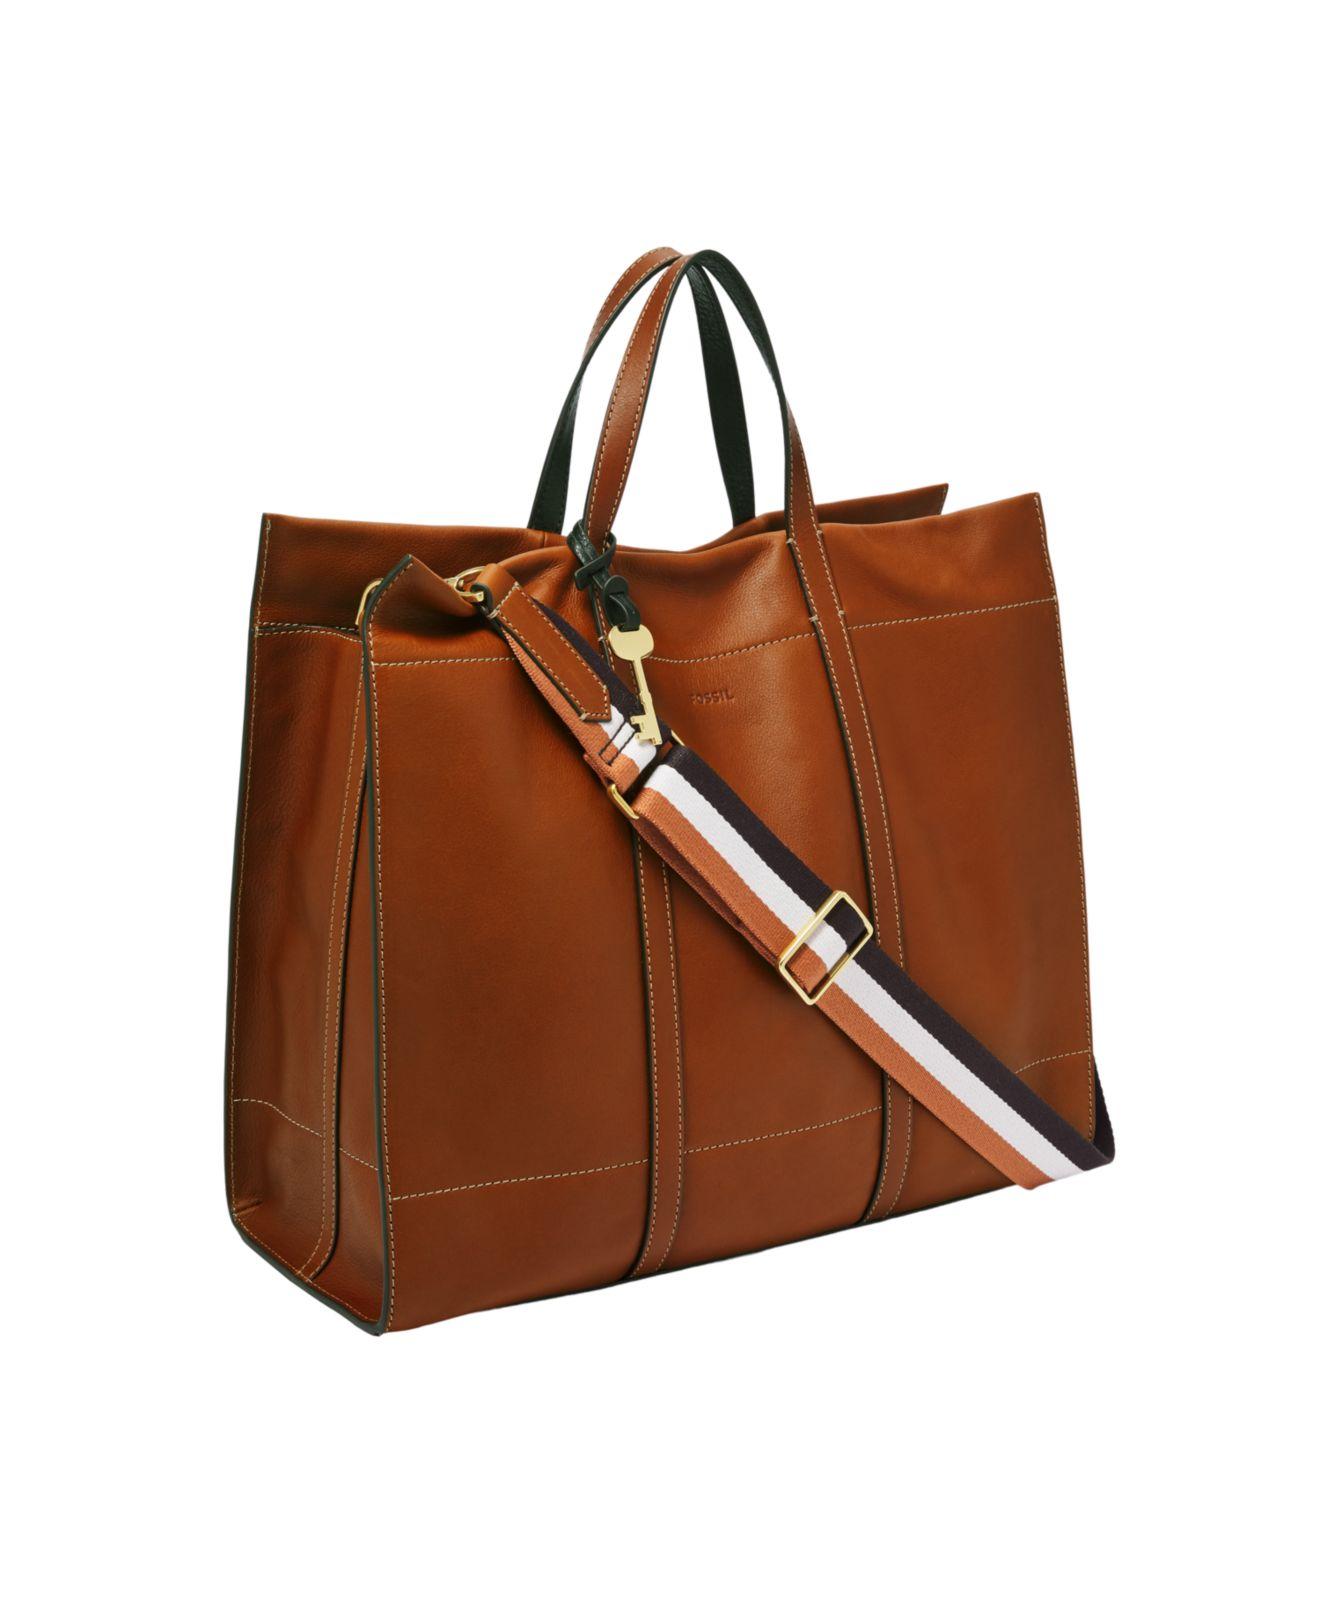 Fossil Carmen Leather Tote in Brown - Lyst